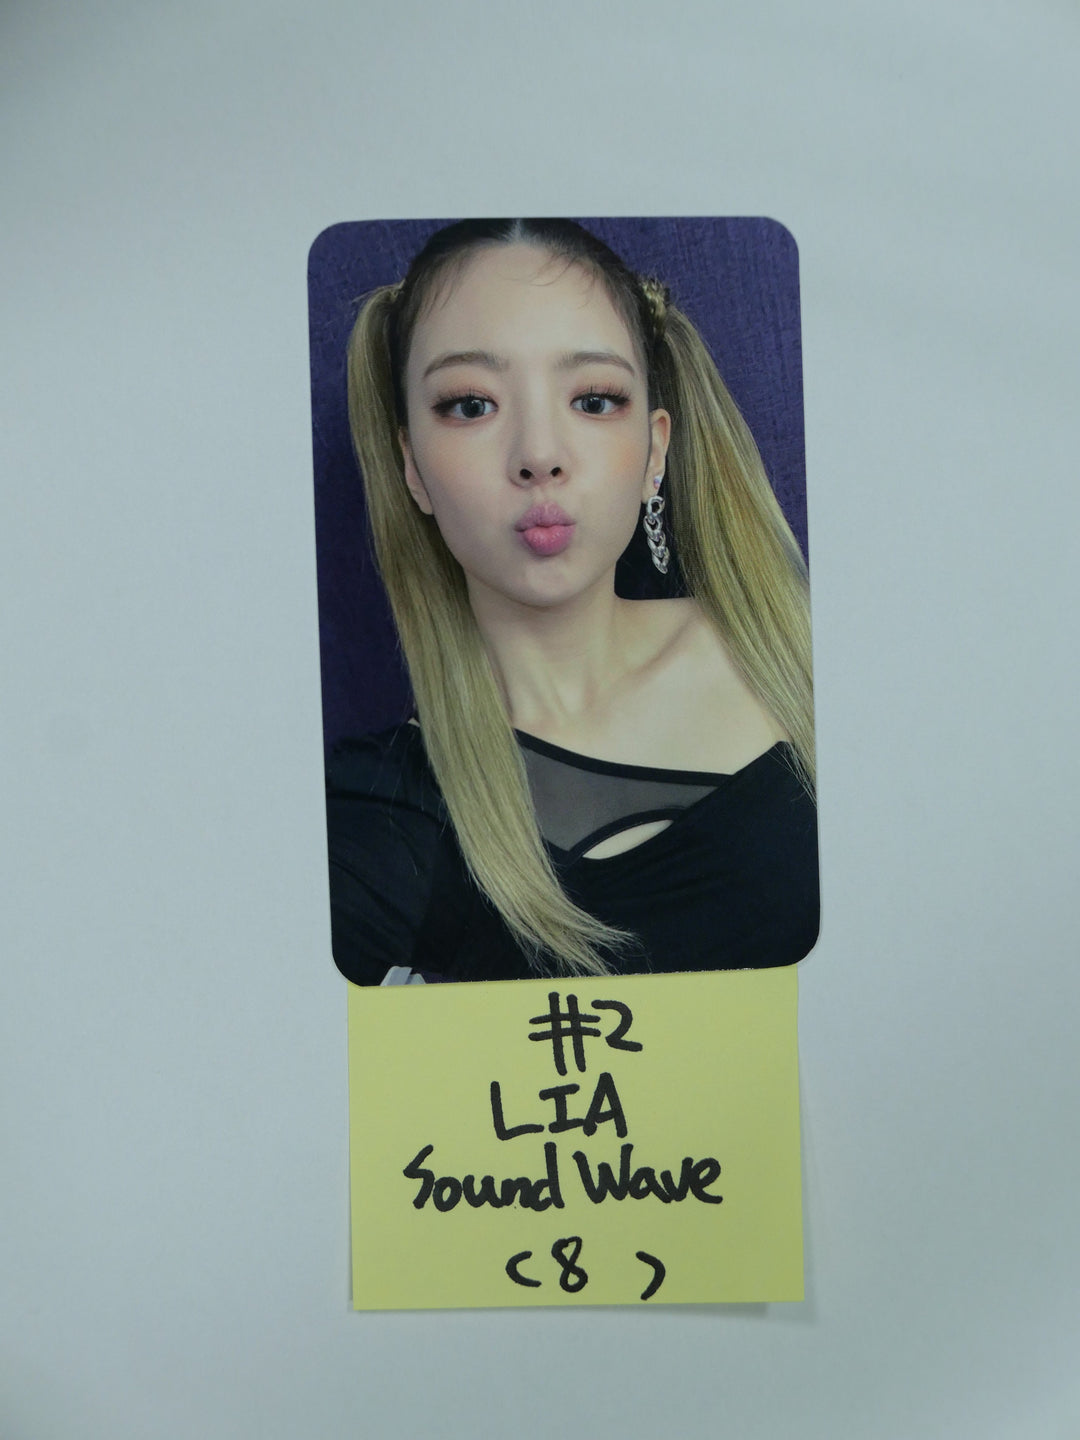 LIA (Of ITZY) ‘CRAZY IN LOVE’ - Soundwave Fansign Event Photocard